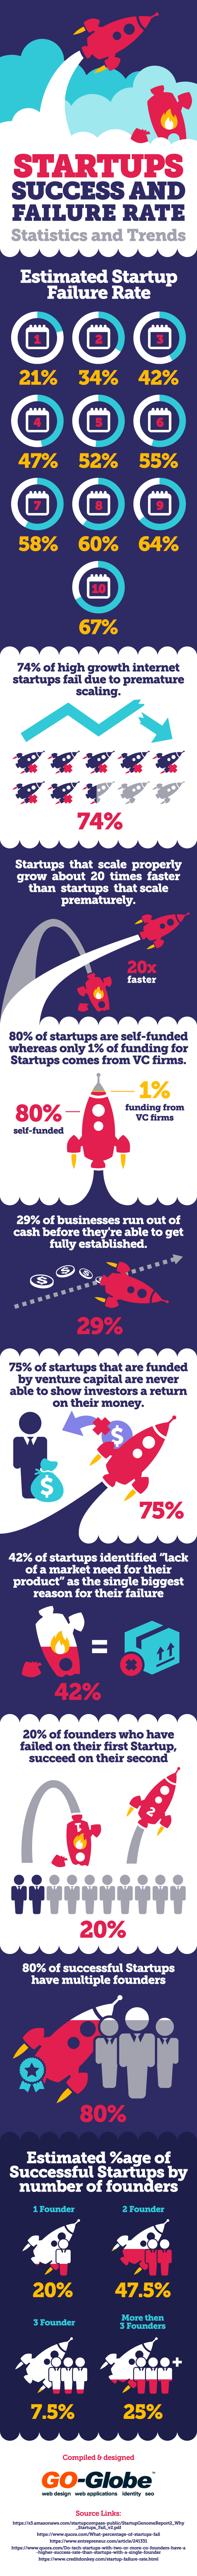 Why Startups Fail and How Yours Can Succeed [Infographic]